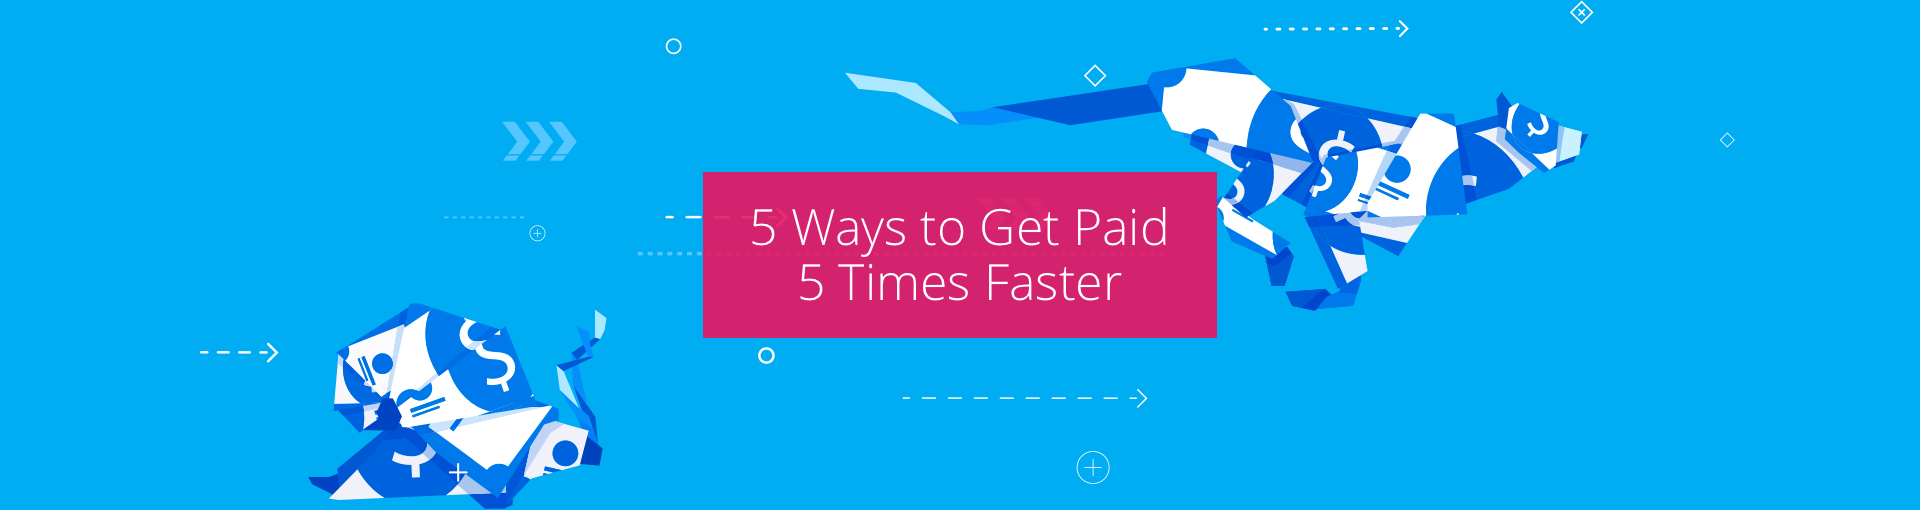 5 Ways to Get Paid 5 Times Faster Featured Image